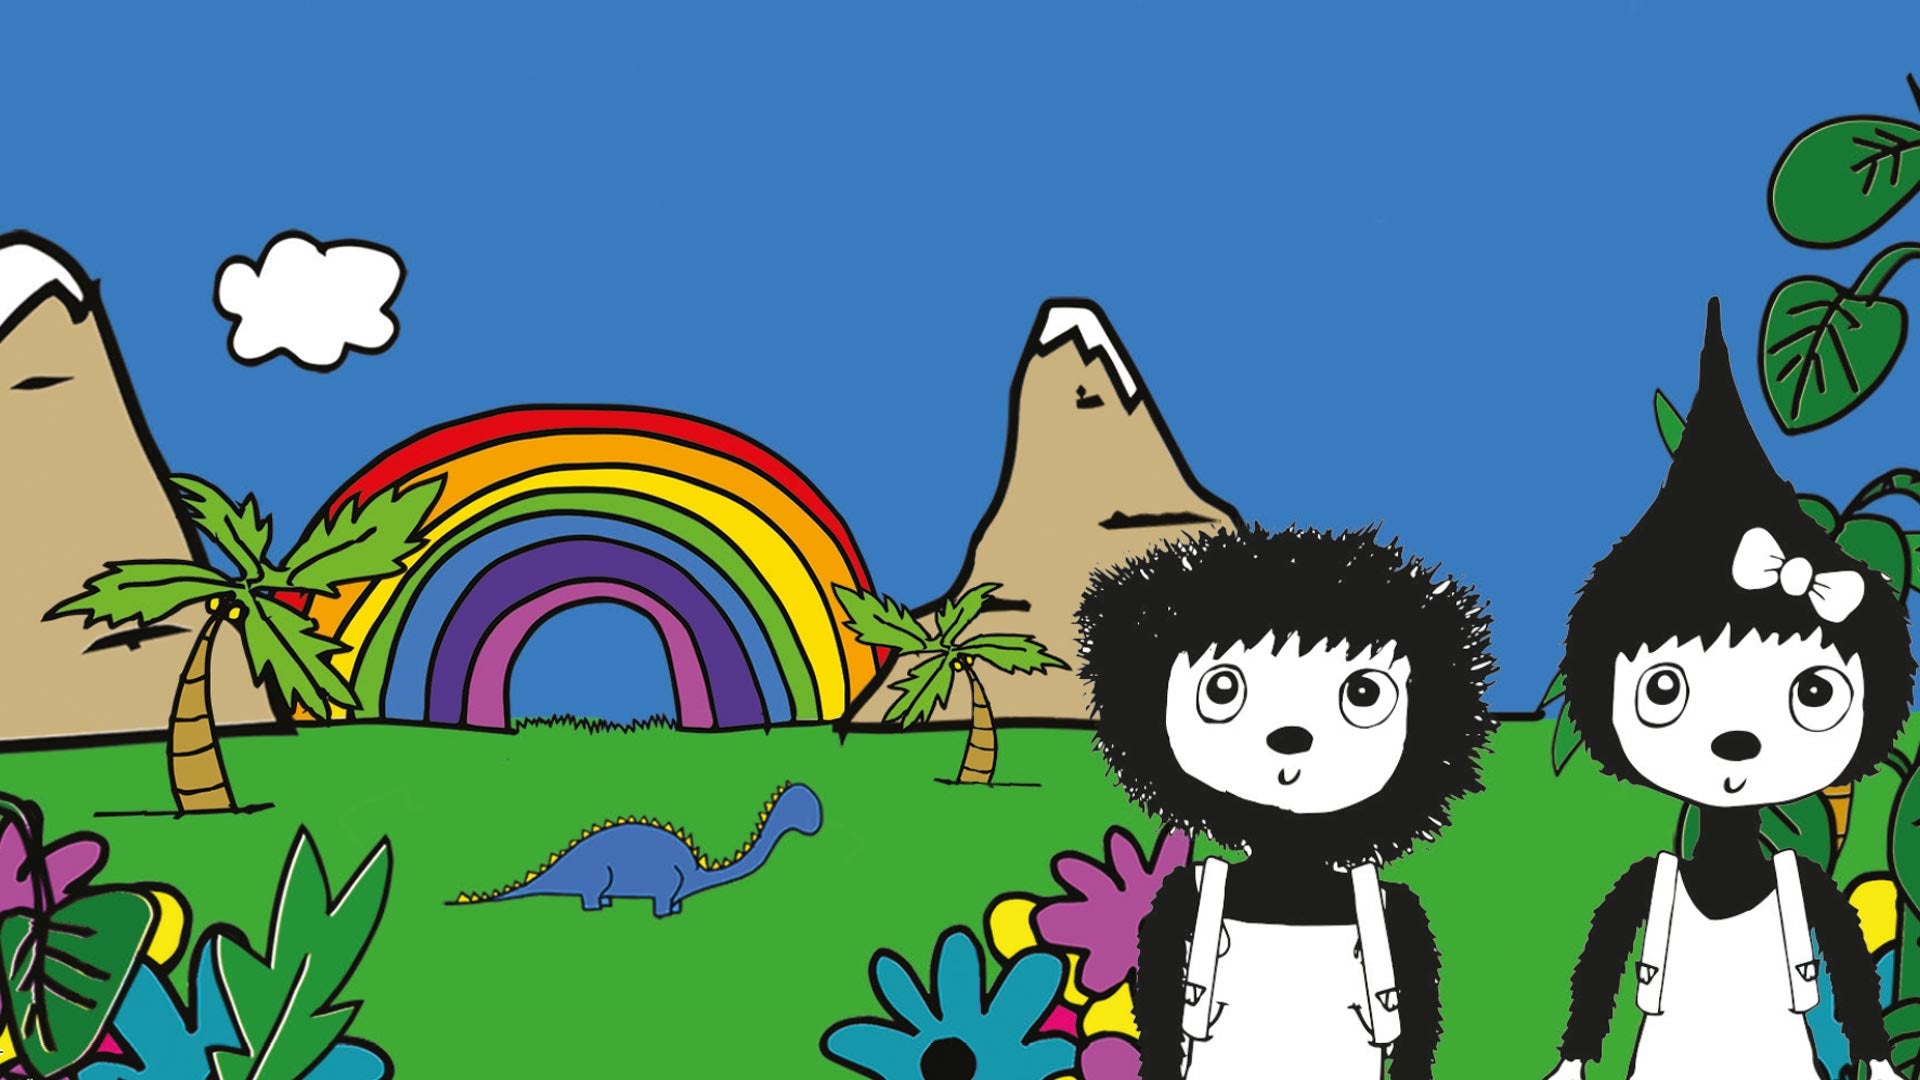 Zip and Zoe standing with grass, rainbow, plants and mountains in the background